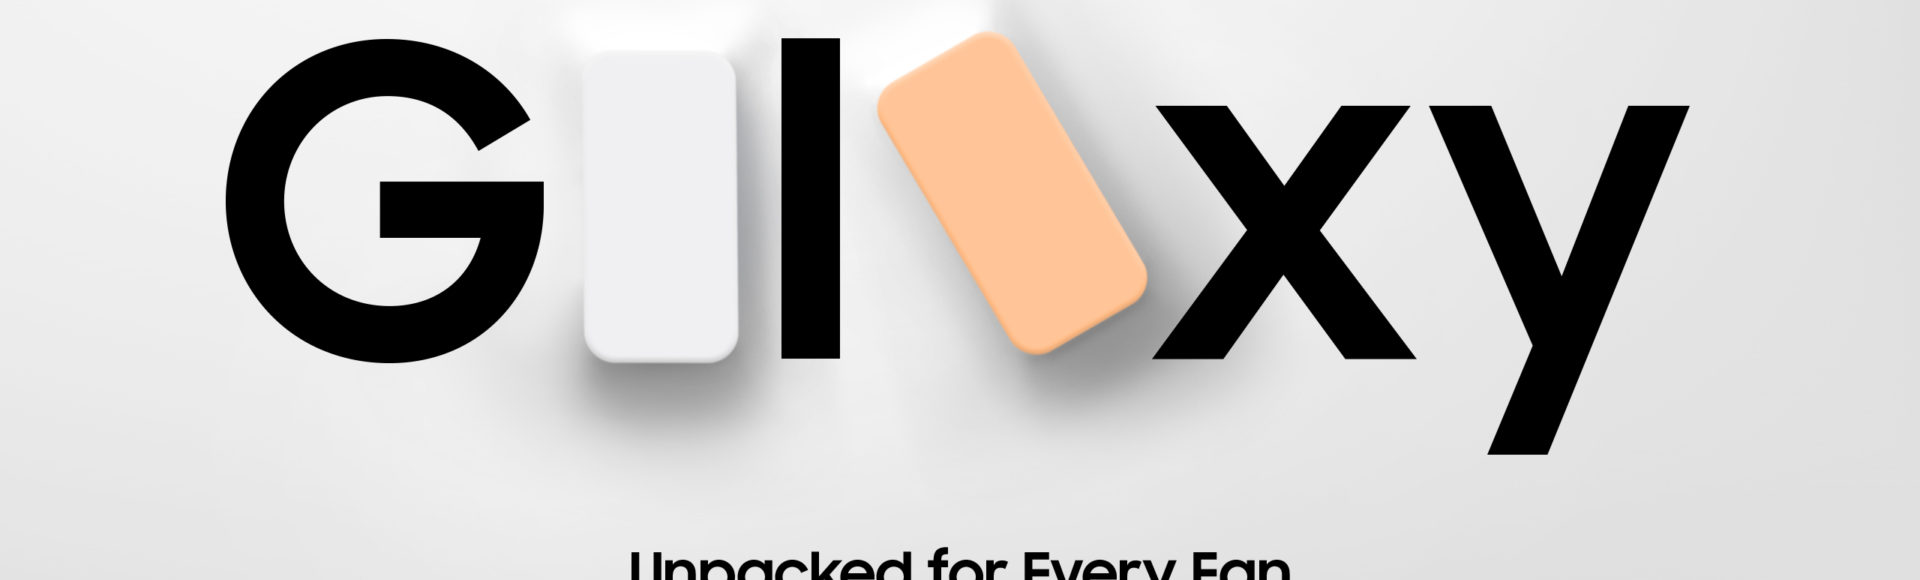 http://droider.ru/wp-content/uploads/2020/09/03_galaxy_unpacked_for_every_fan_invitation_white_orange-1920x580.jpg